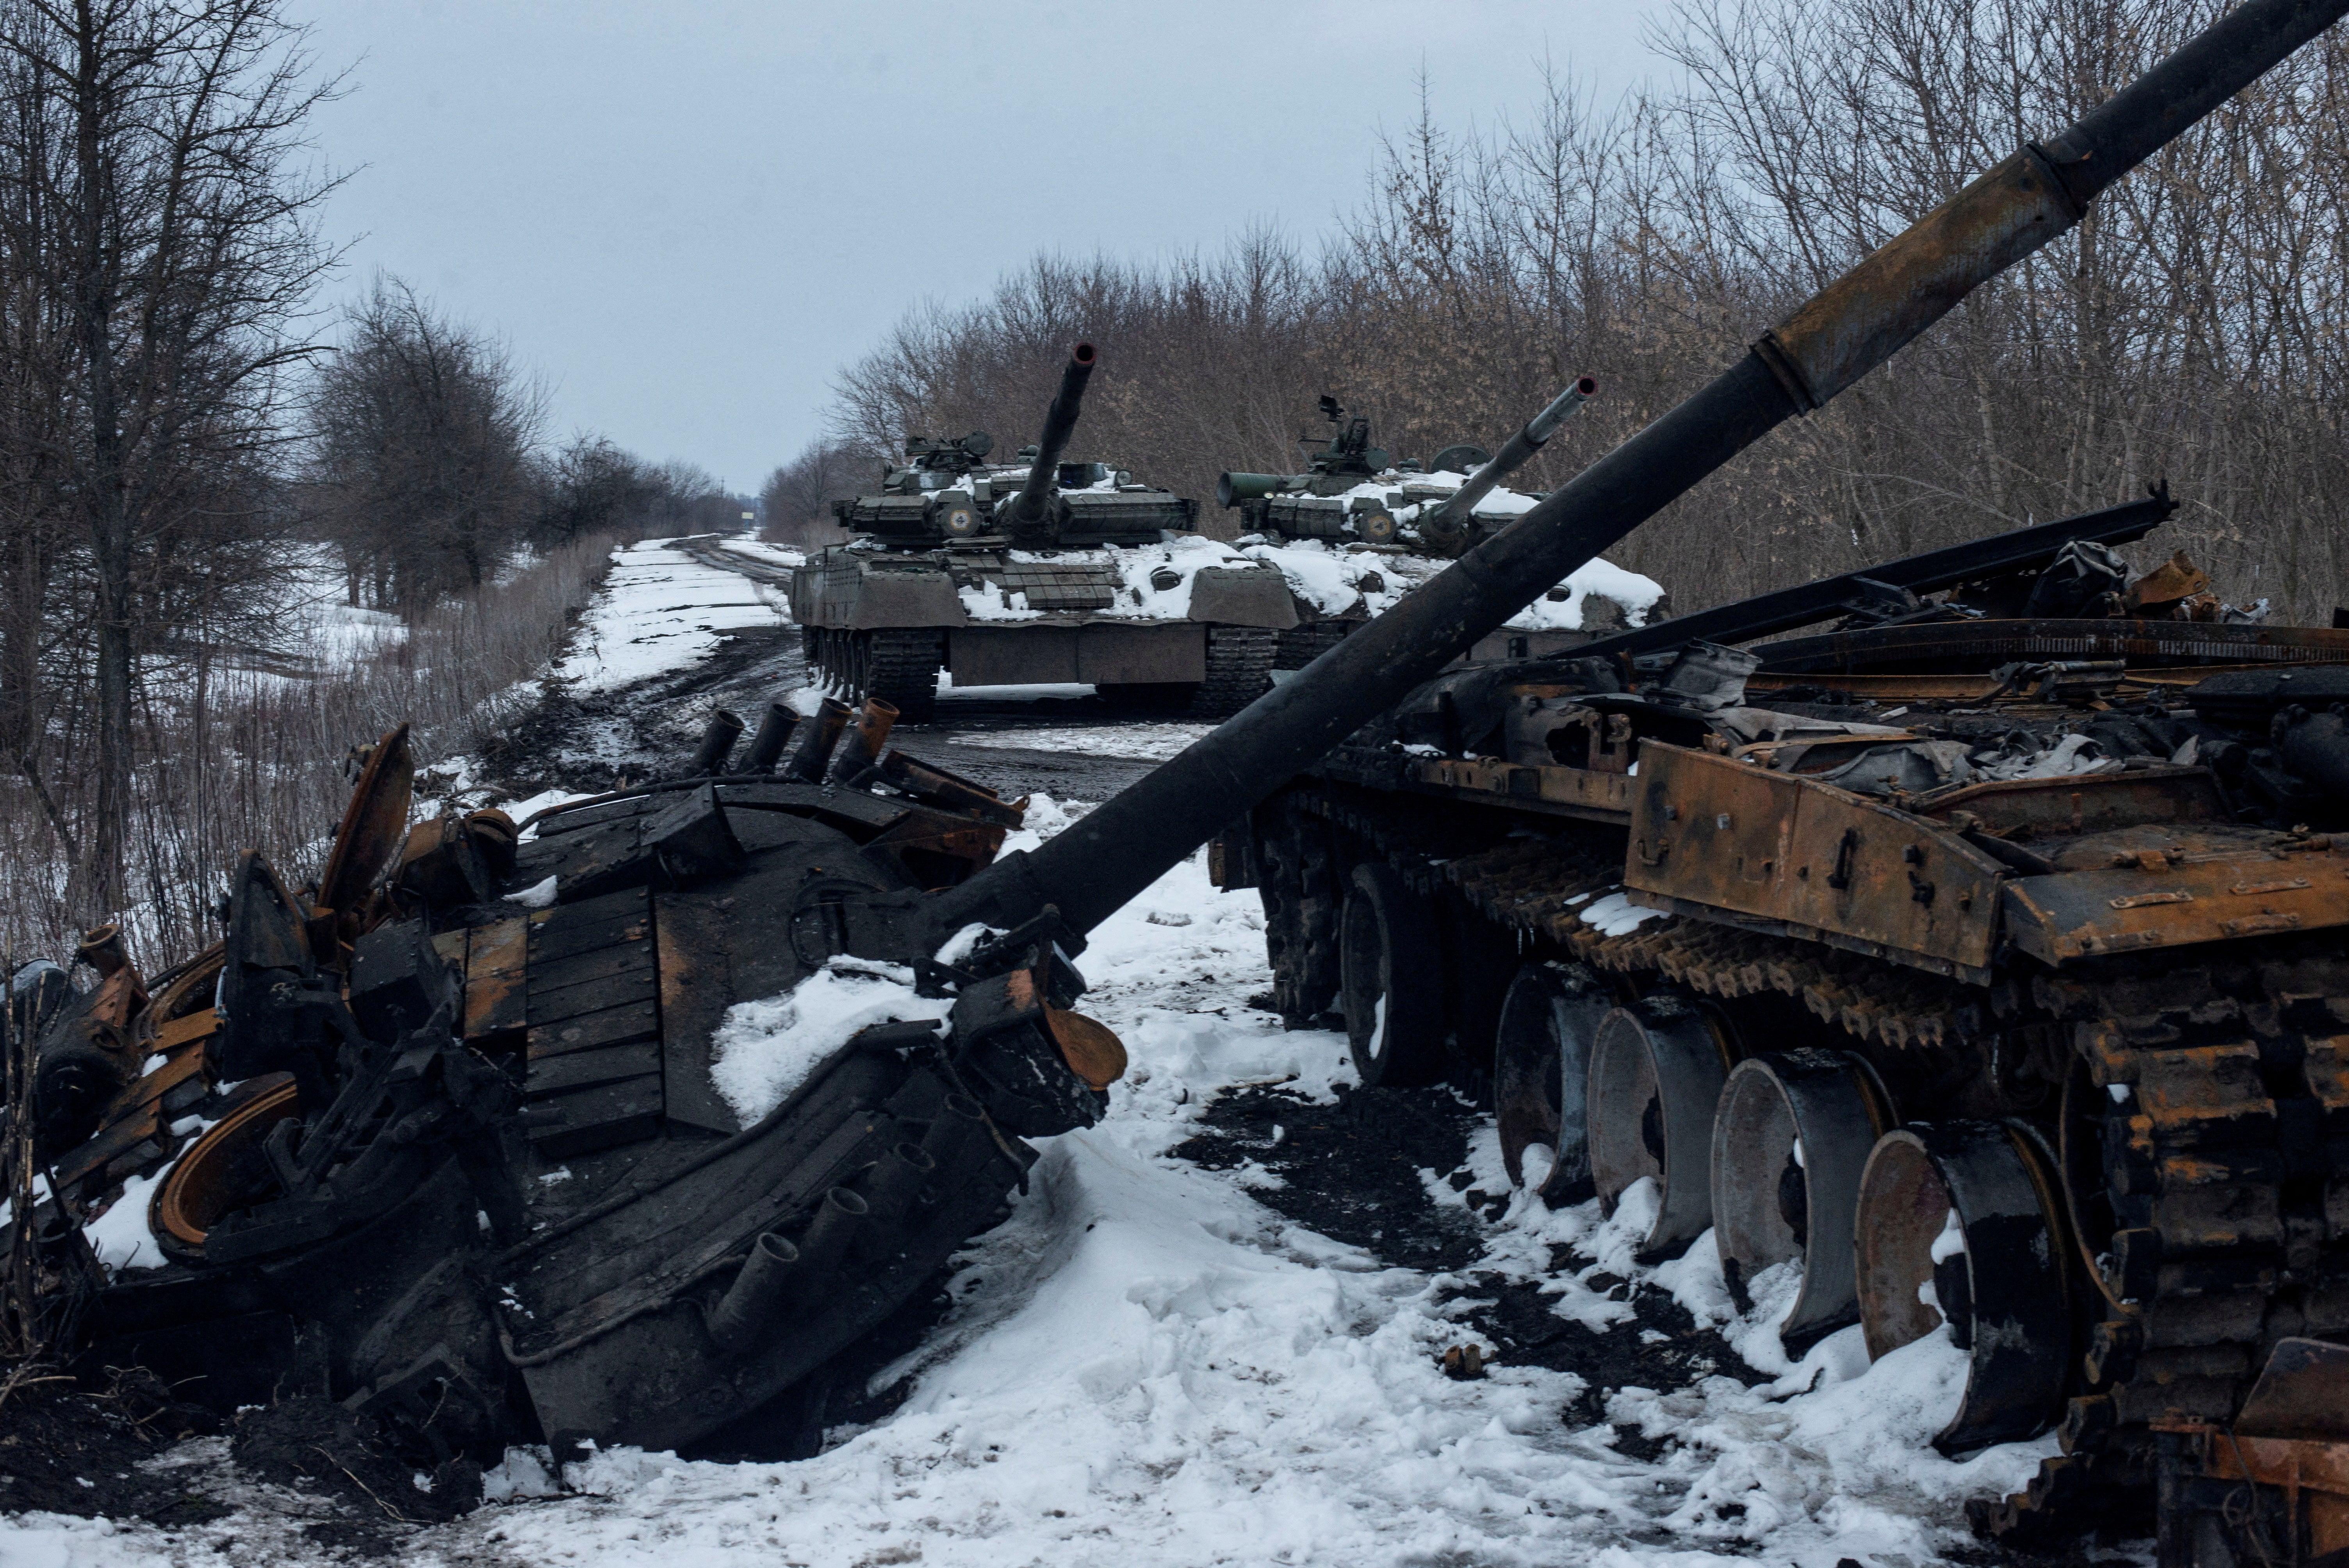 A charred Russian tank and captured tanks in the Sumy region of Ukraine.